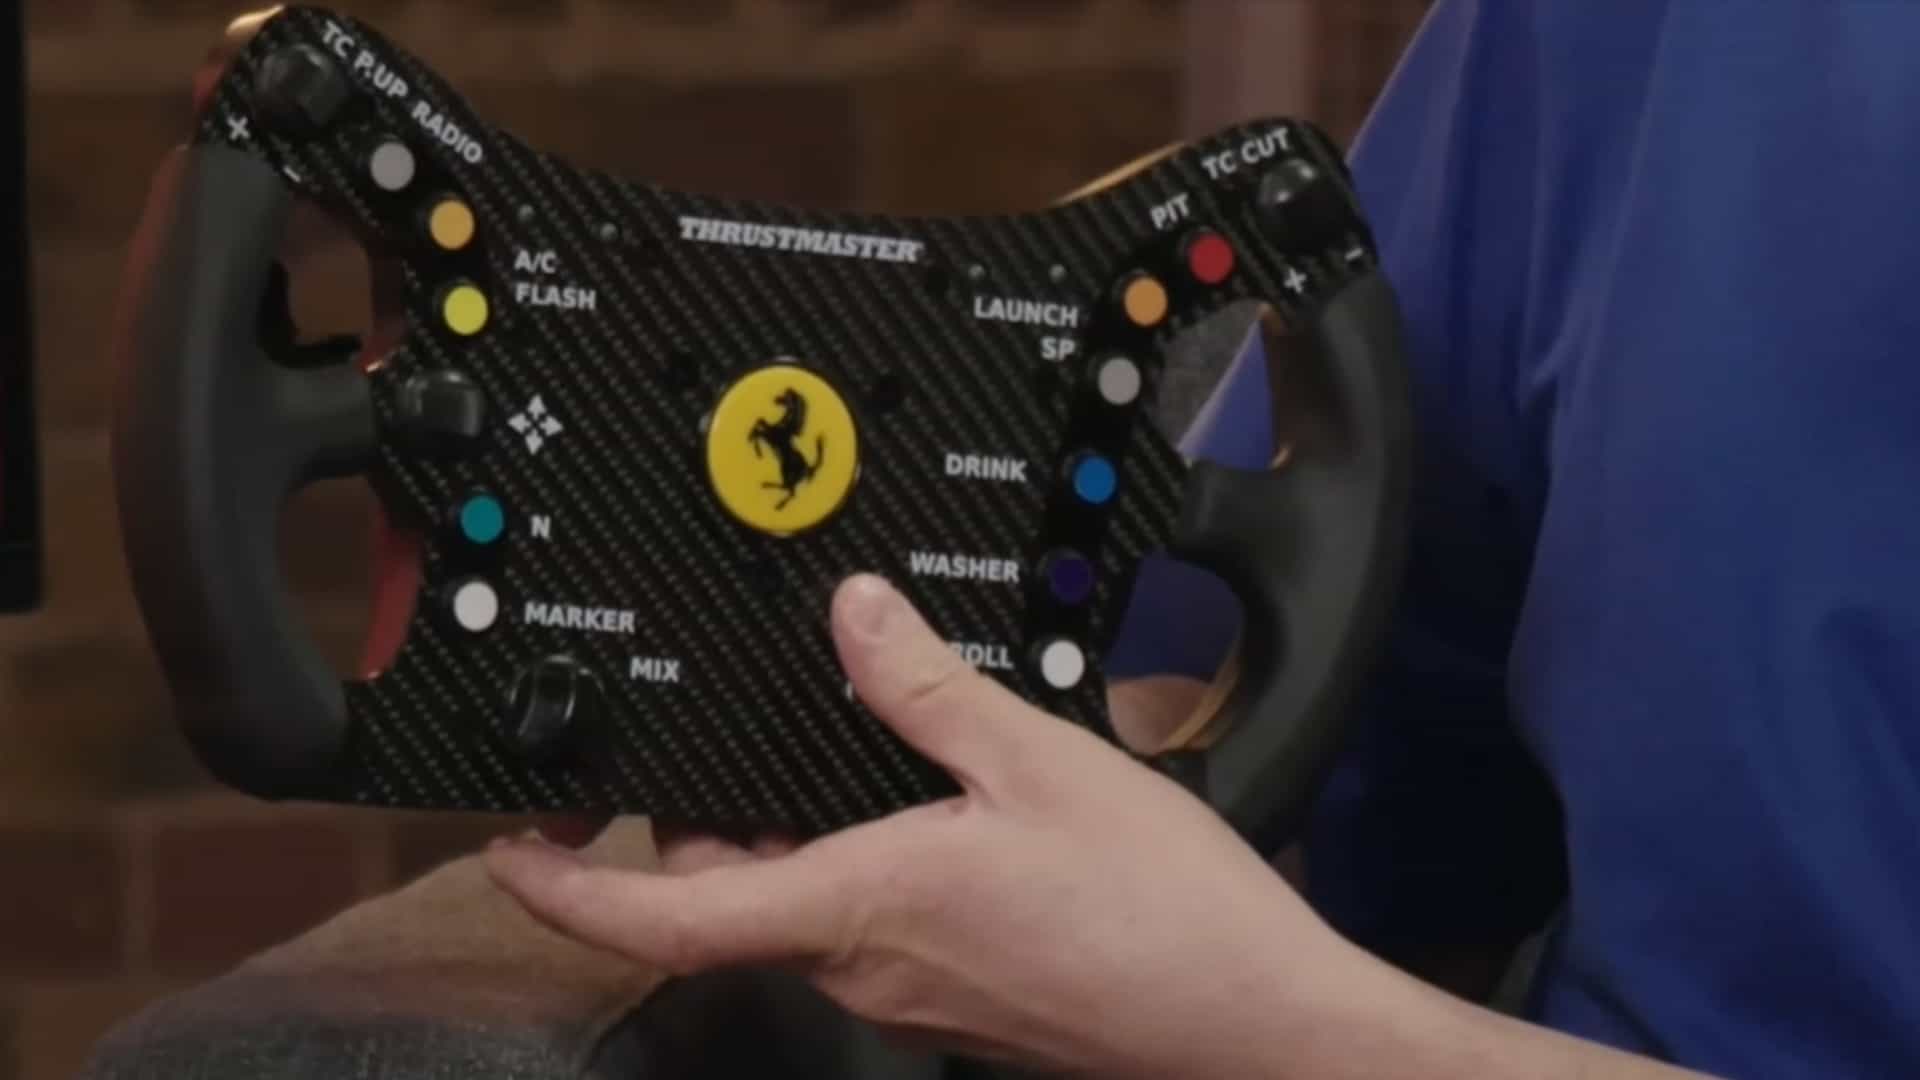 Thrustmaster has added a mini steering wheel to a gamepad